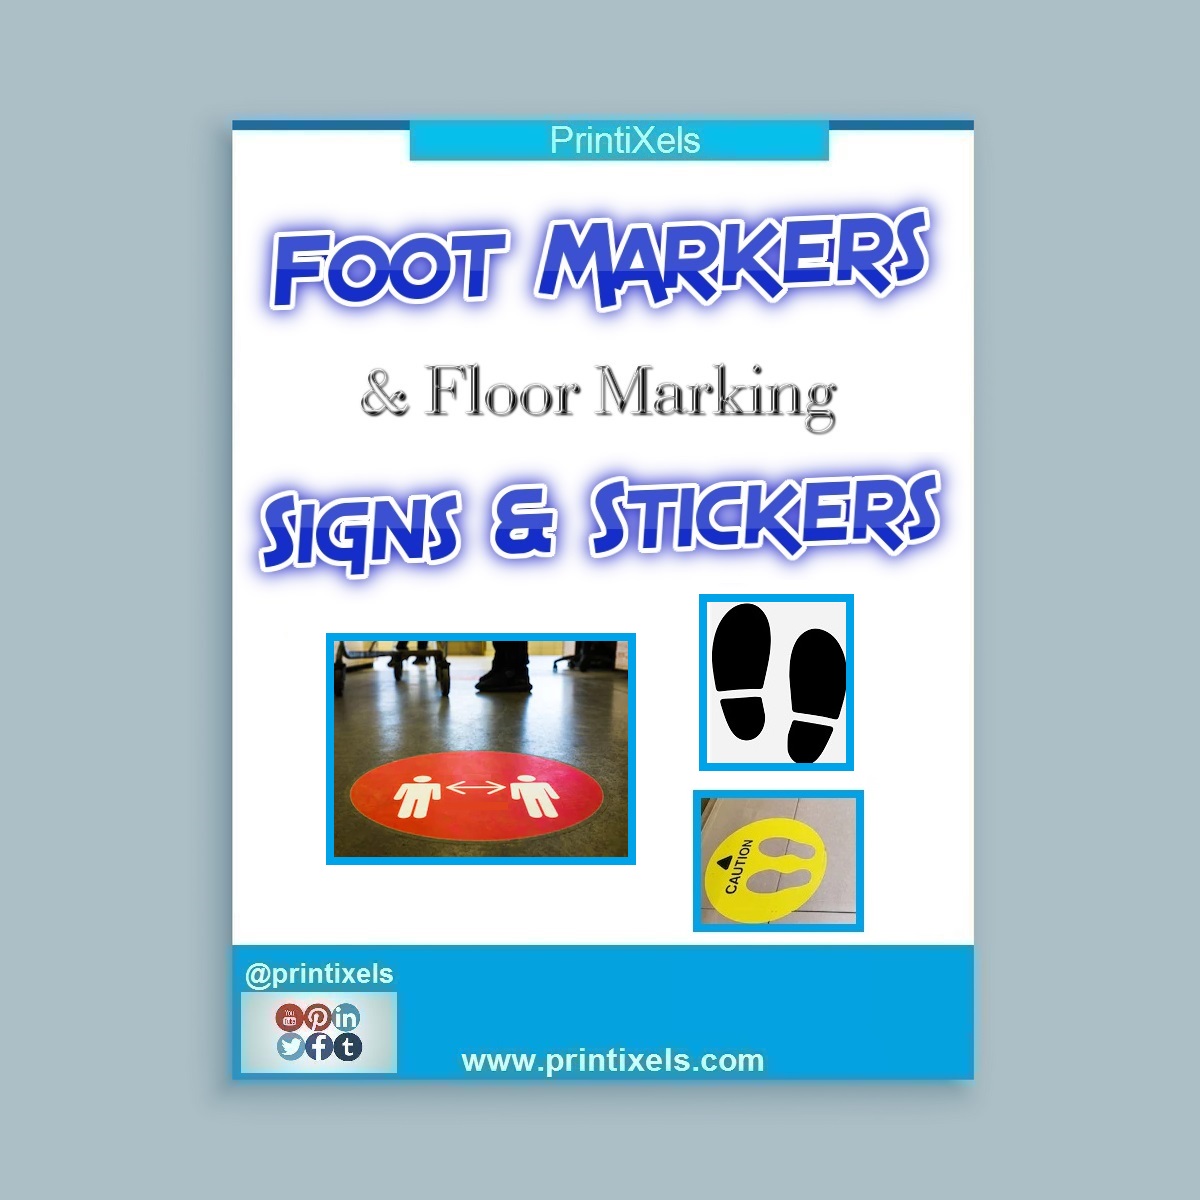 Foot Markers & Floor Marking Signs & Stickers Philippines